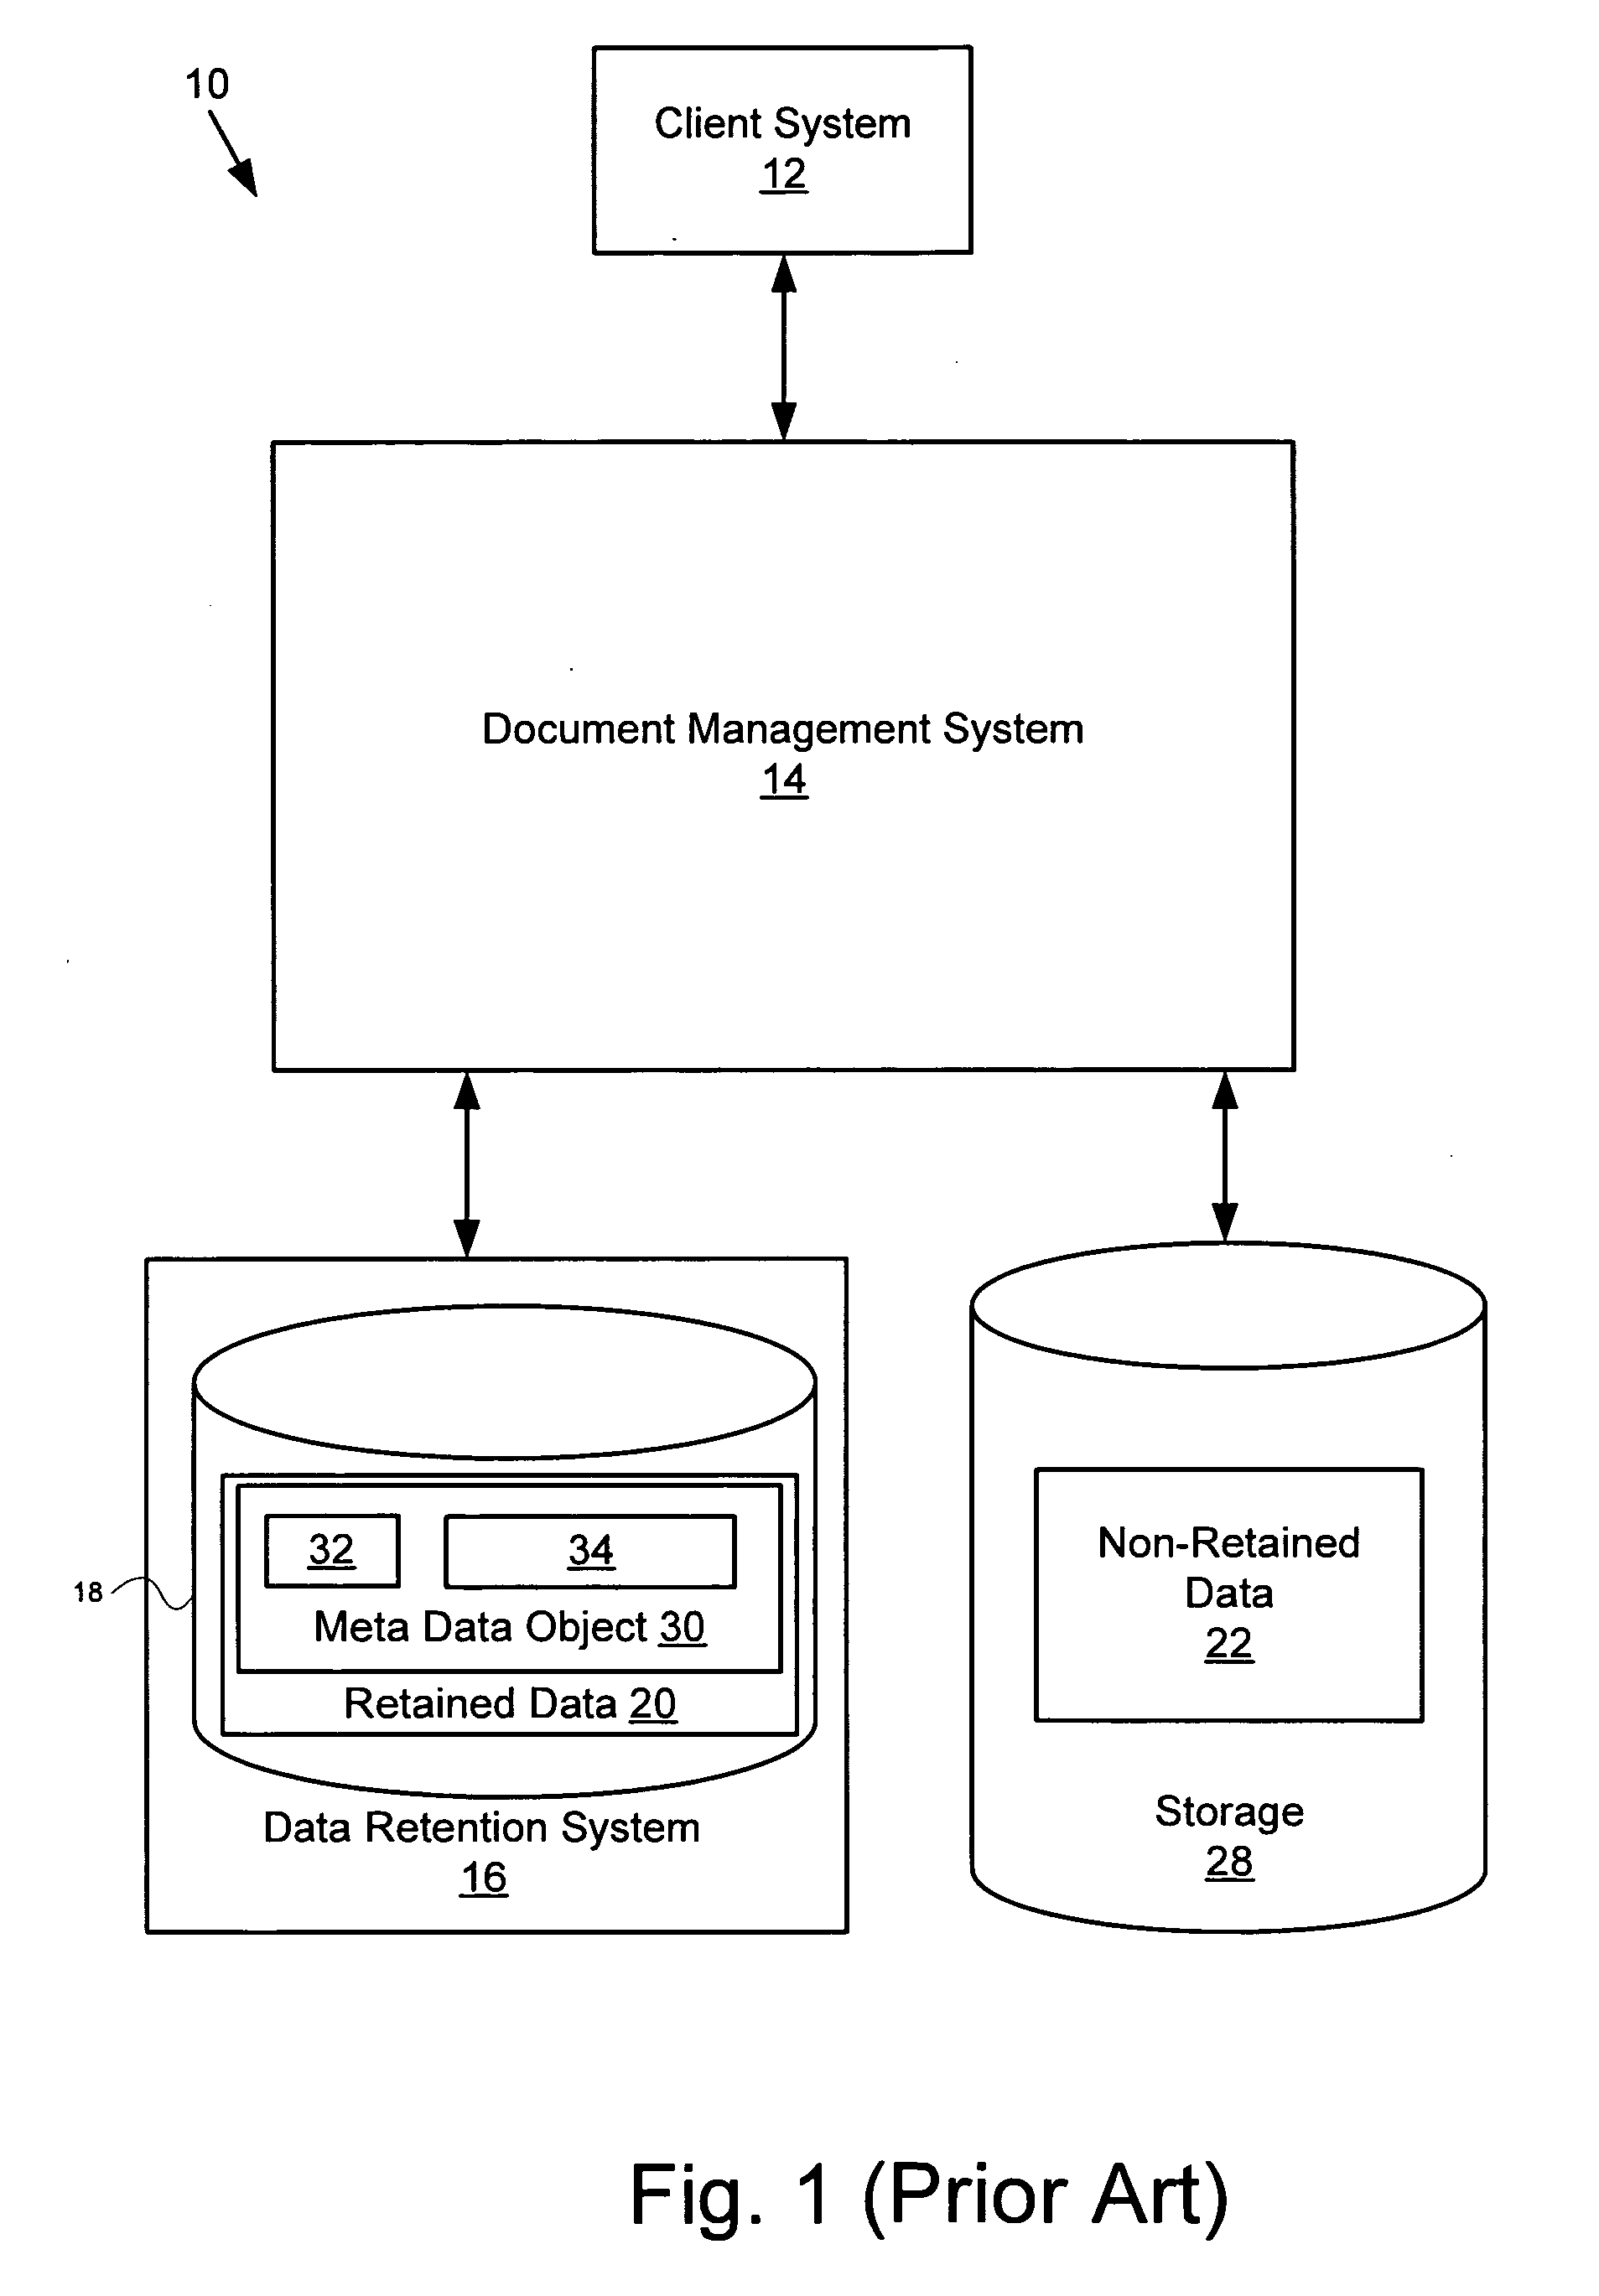 Apparatus, system, and method for data migration